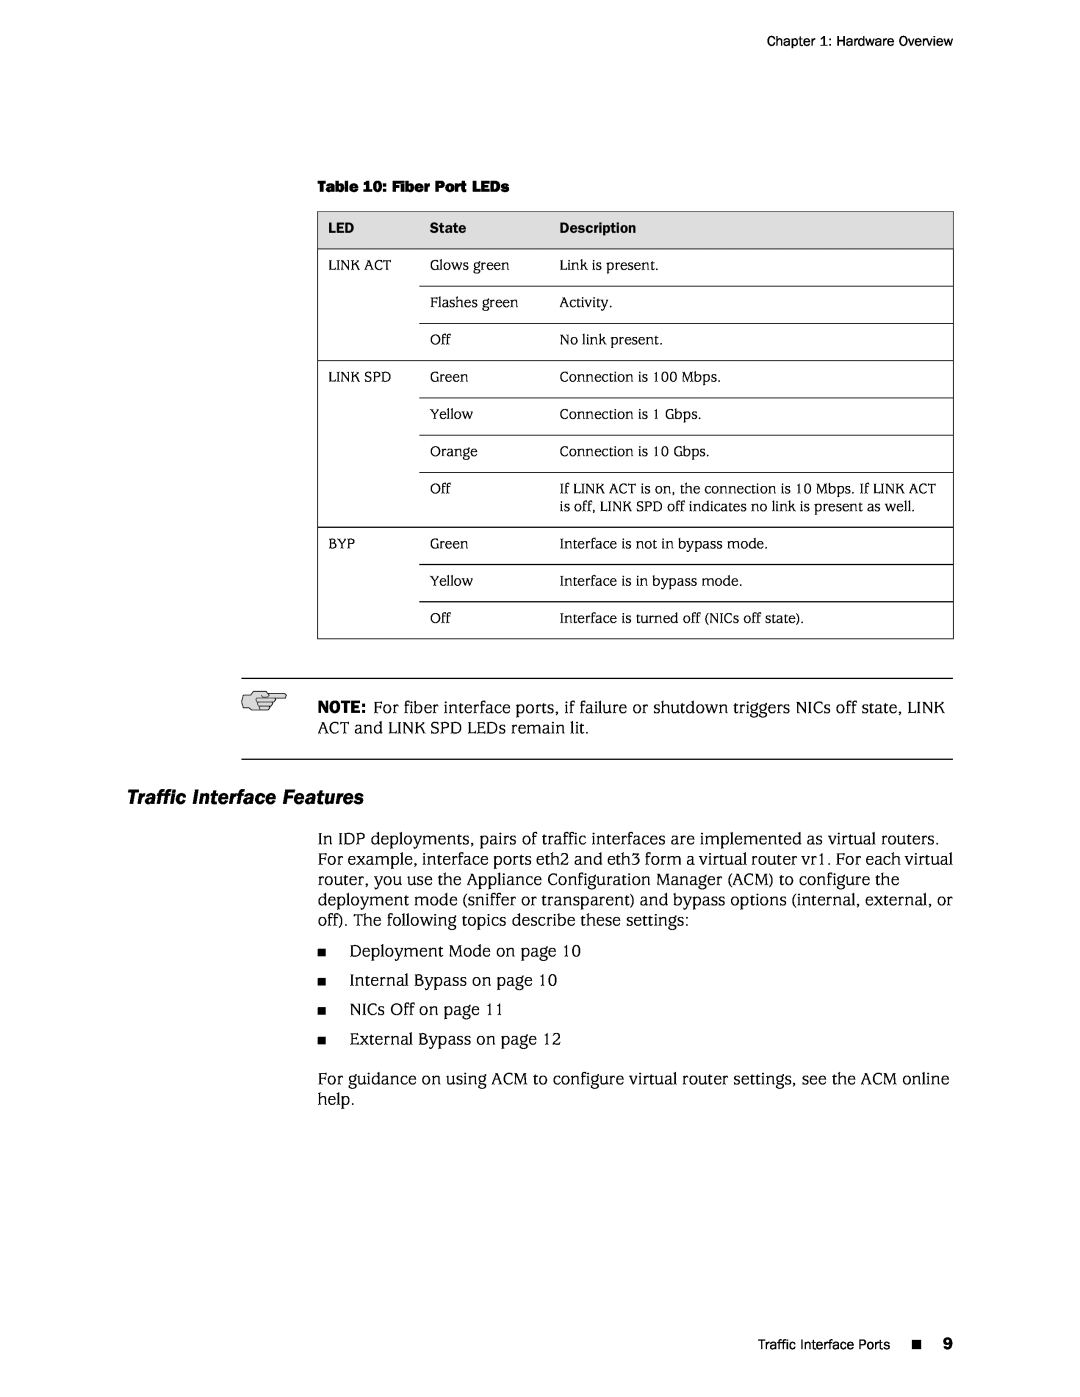 Juniper Networks IDP250 manual Traffic Interface Features 